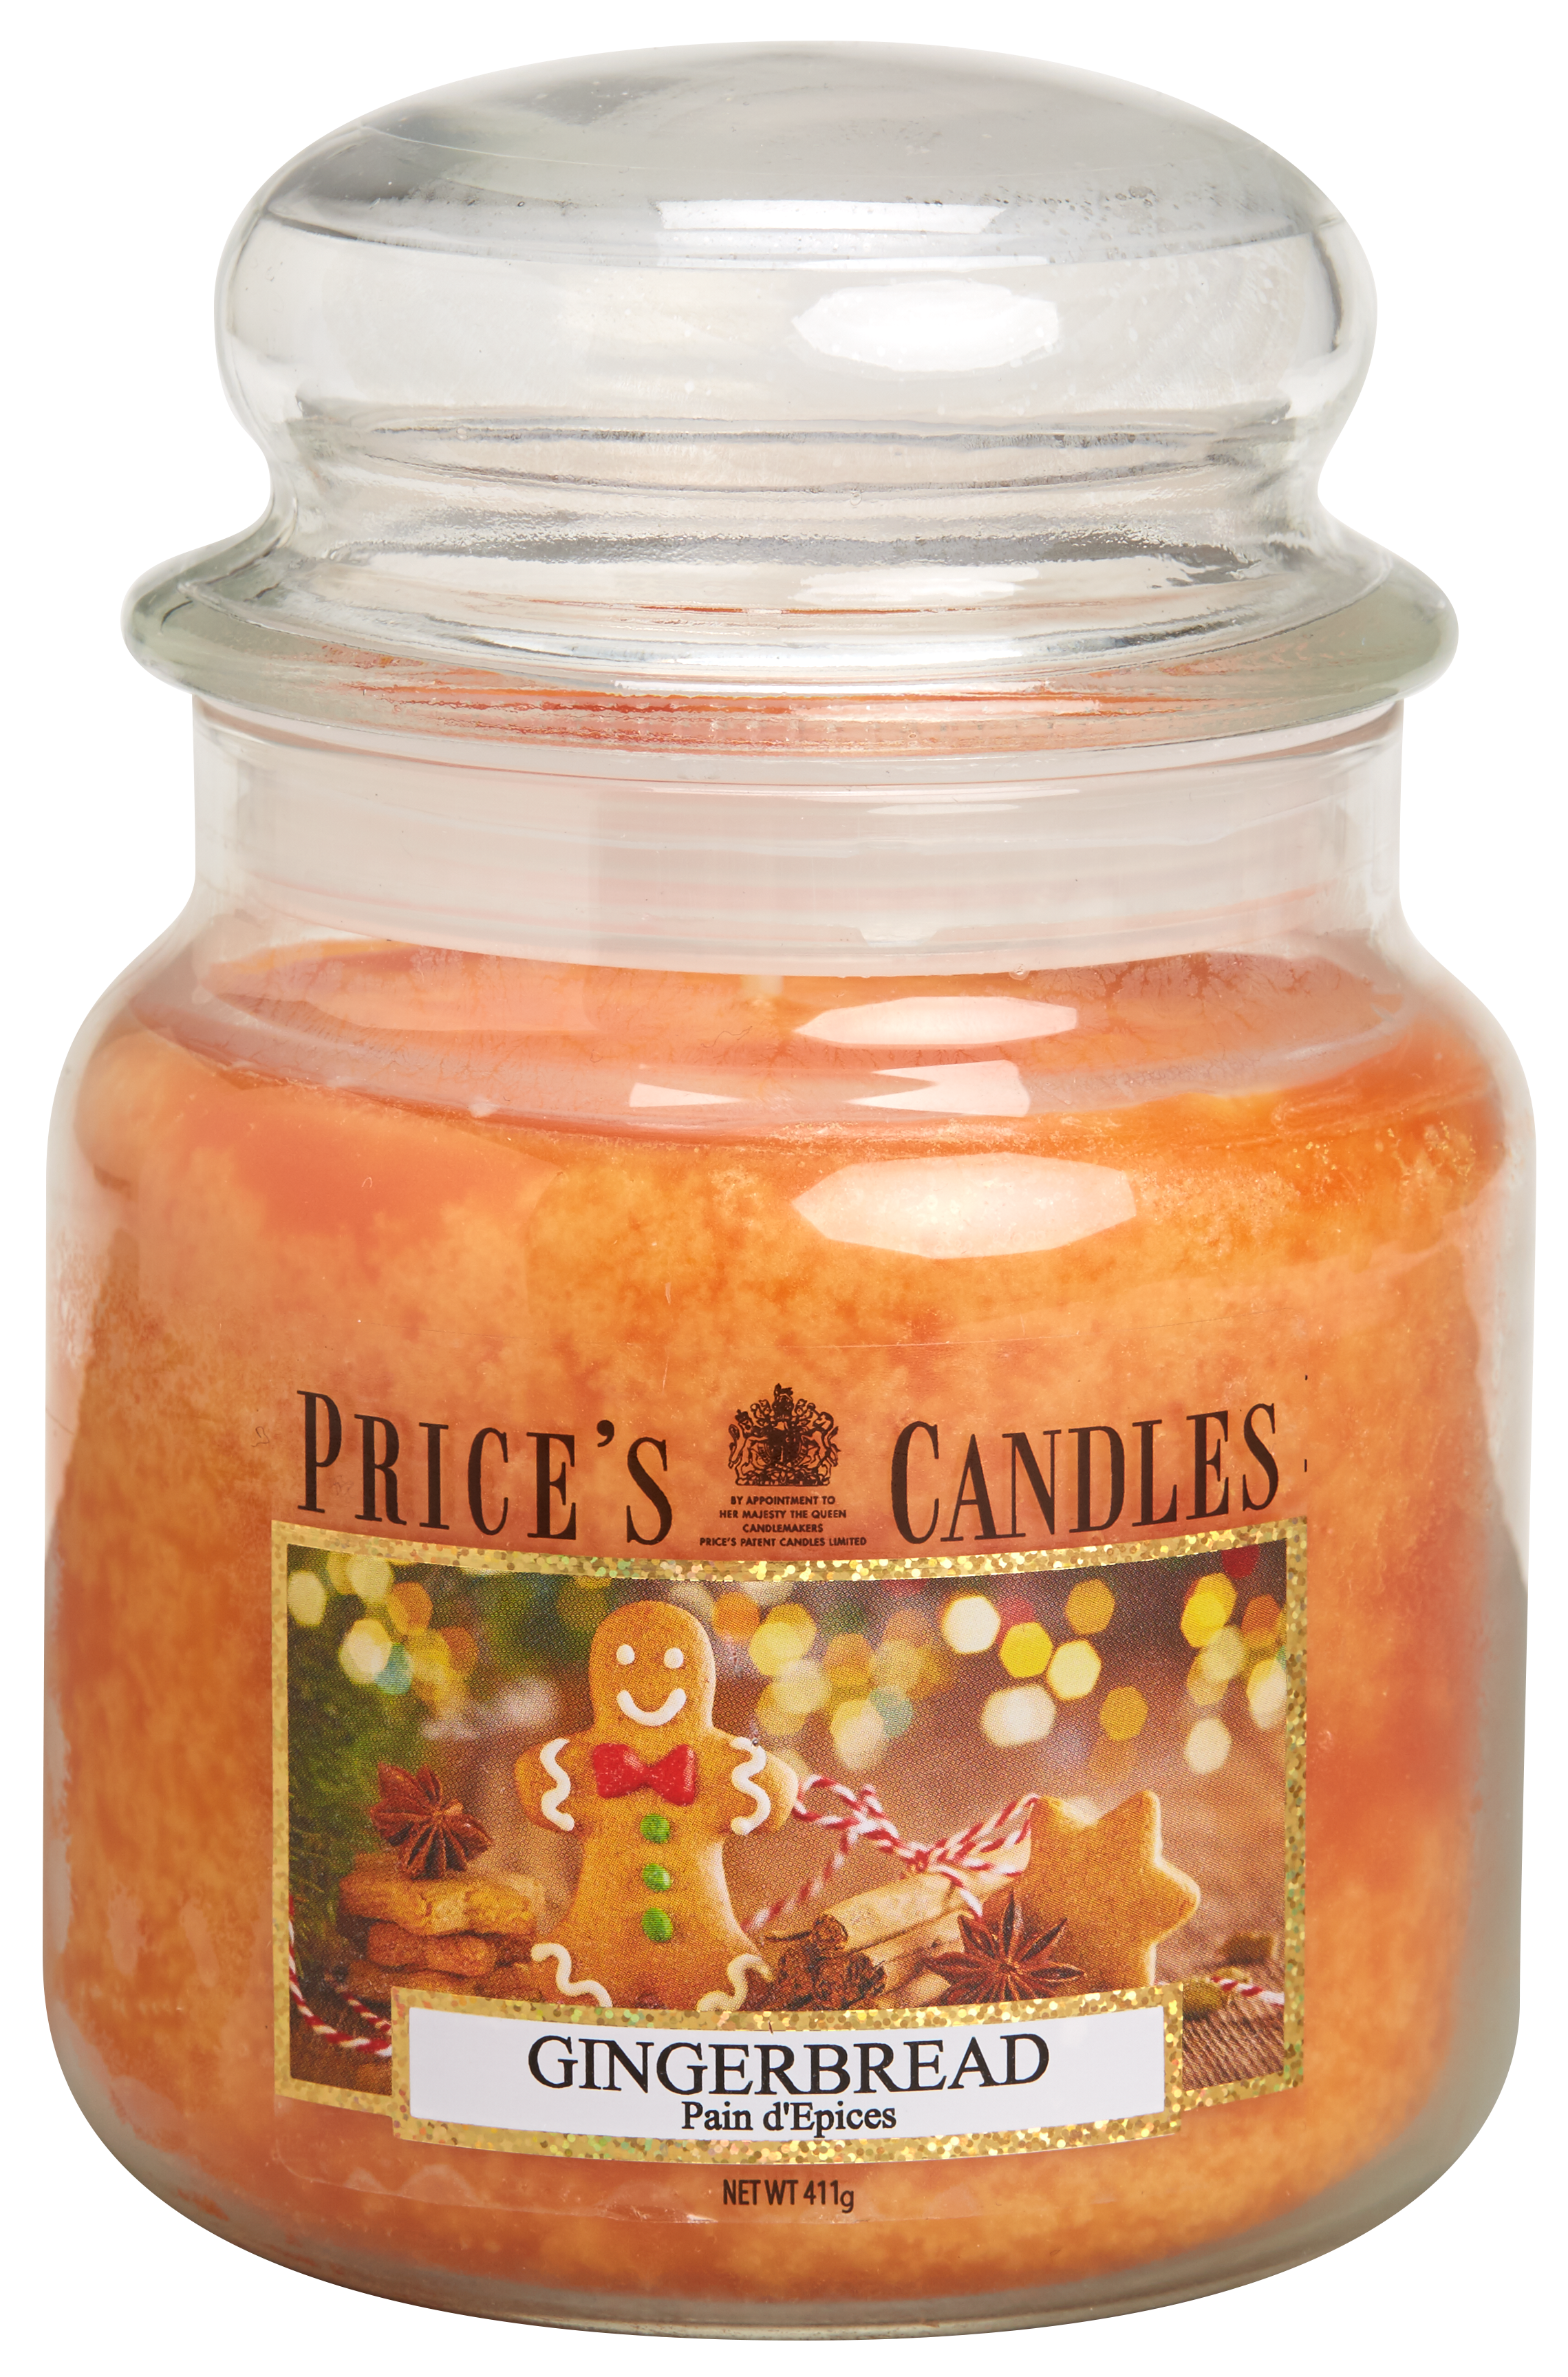 Prices Candle "Gingerbread" 411g  